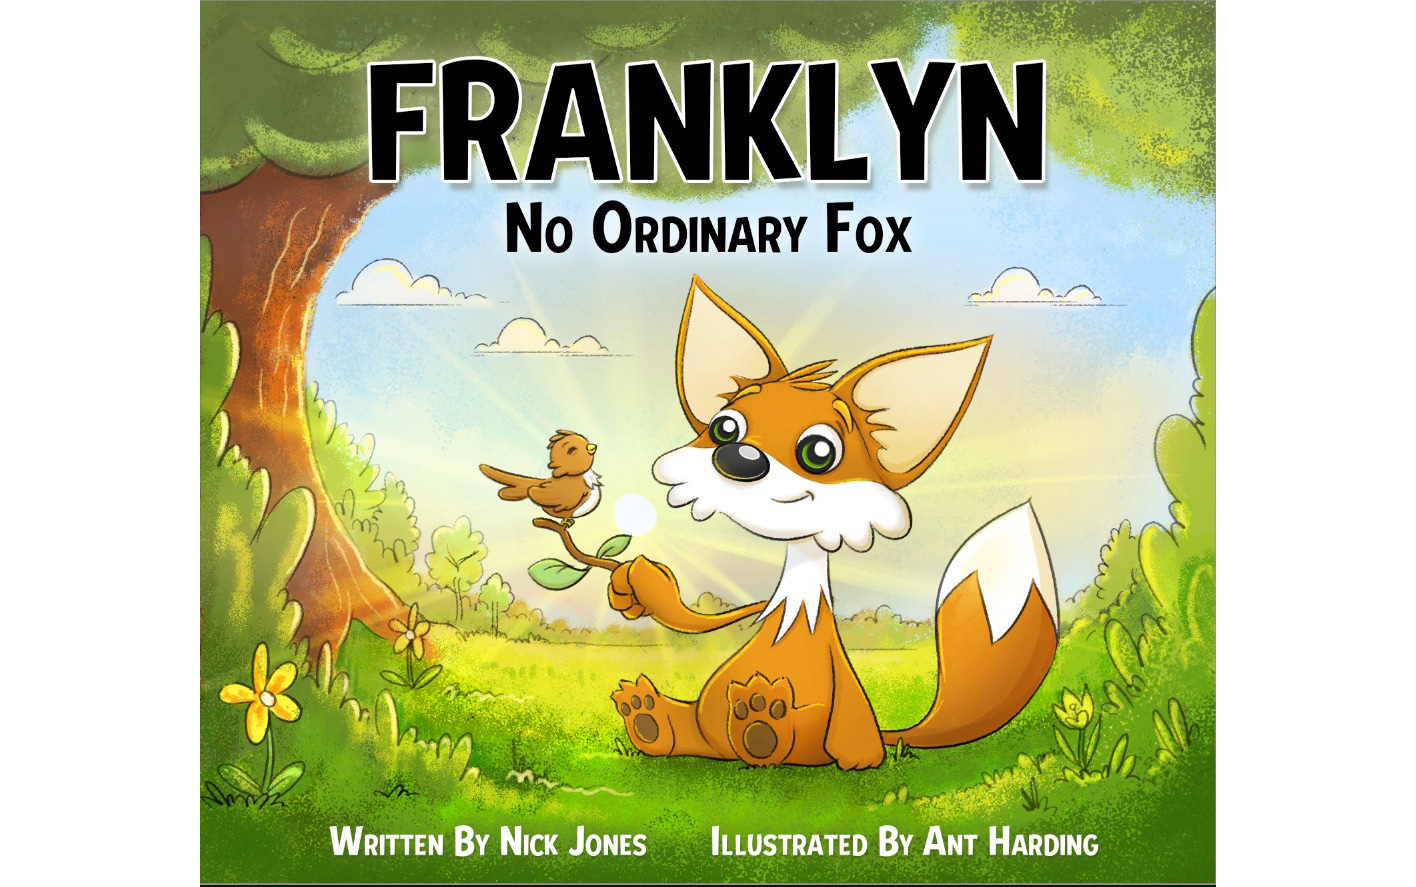 Franklyn – No Ordinary Fox: OUT NOW!